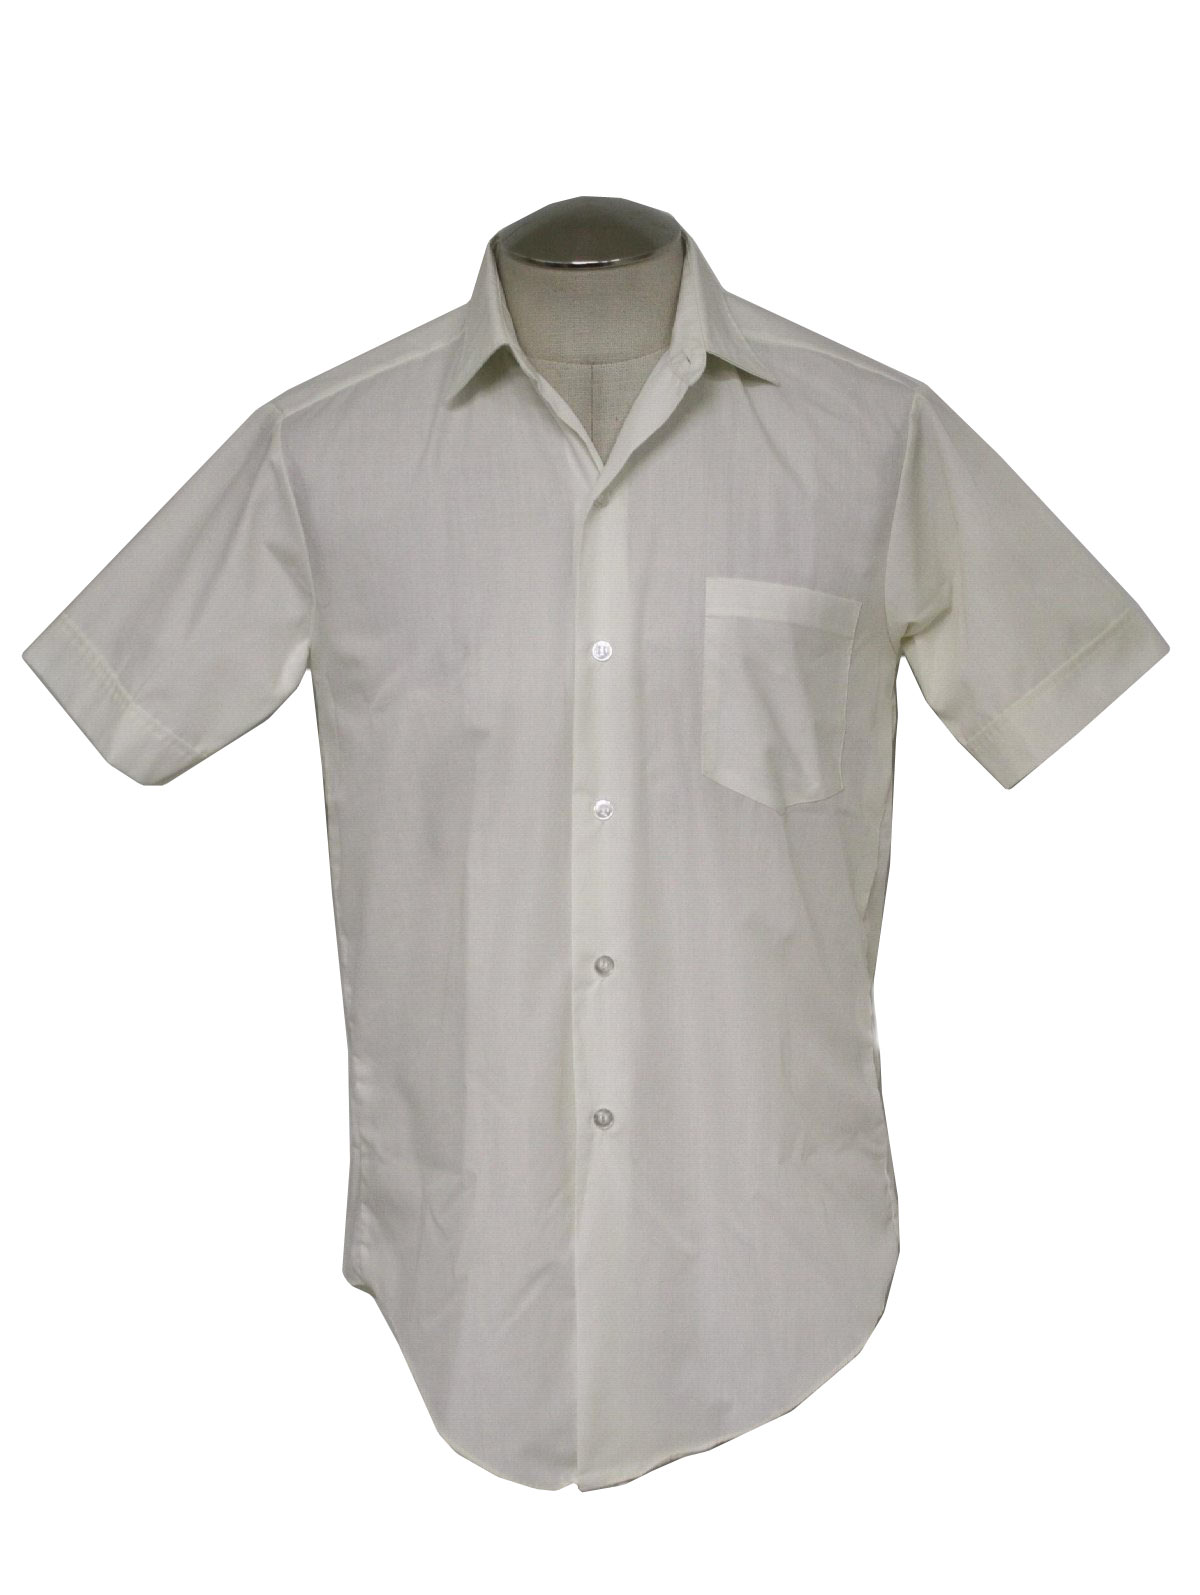 1960s Vintage Shirt: Early 60s -Ramsgate- Mens white cotton polyester ...